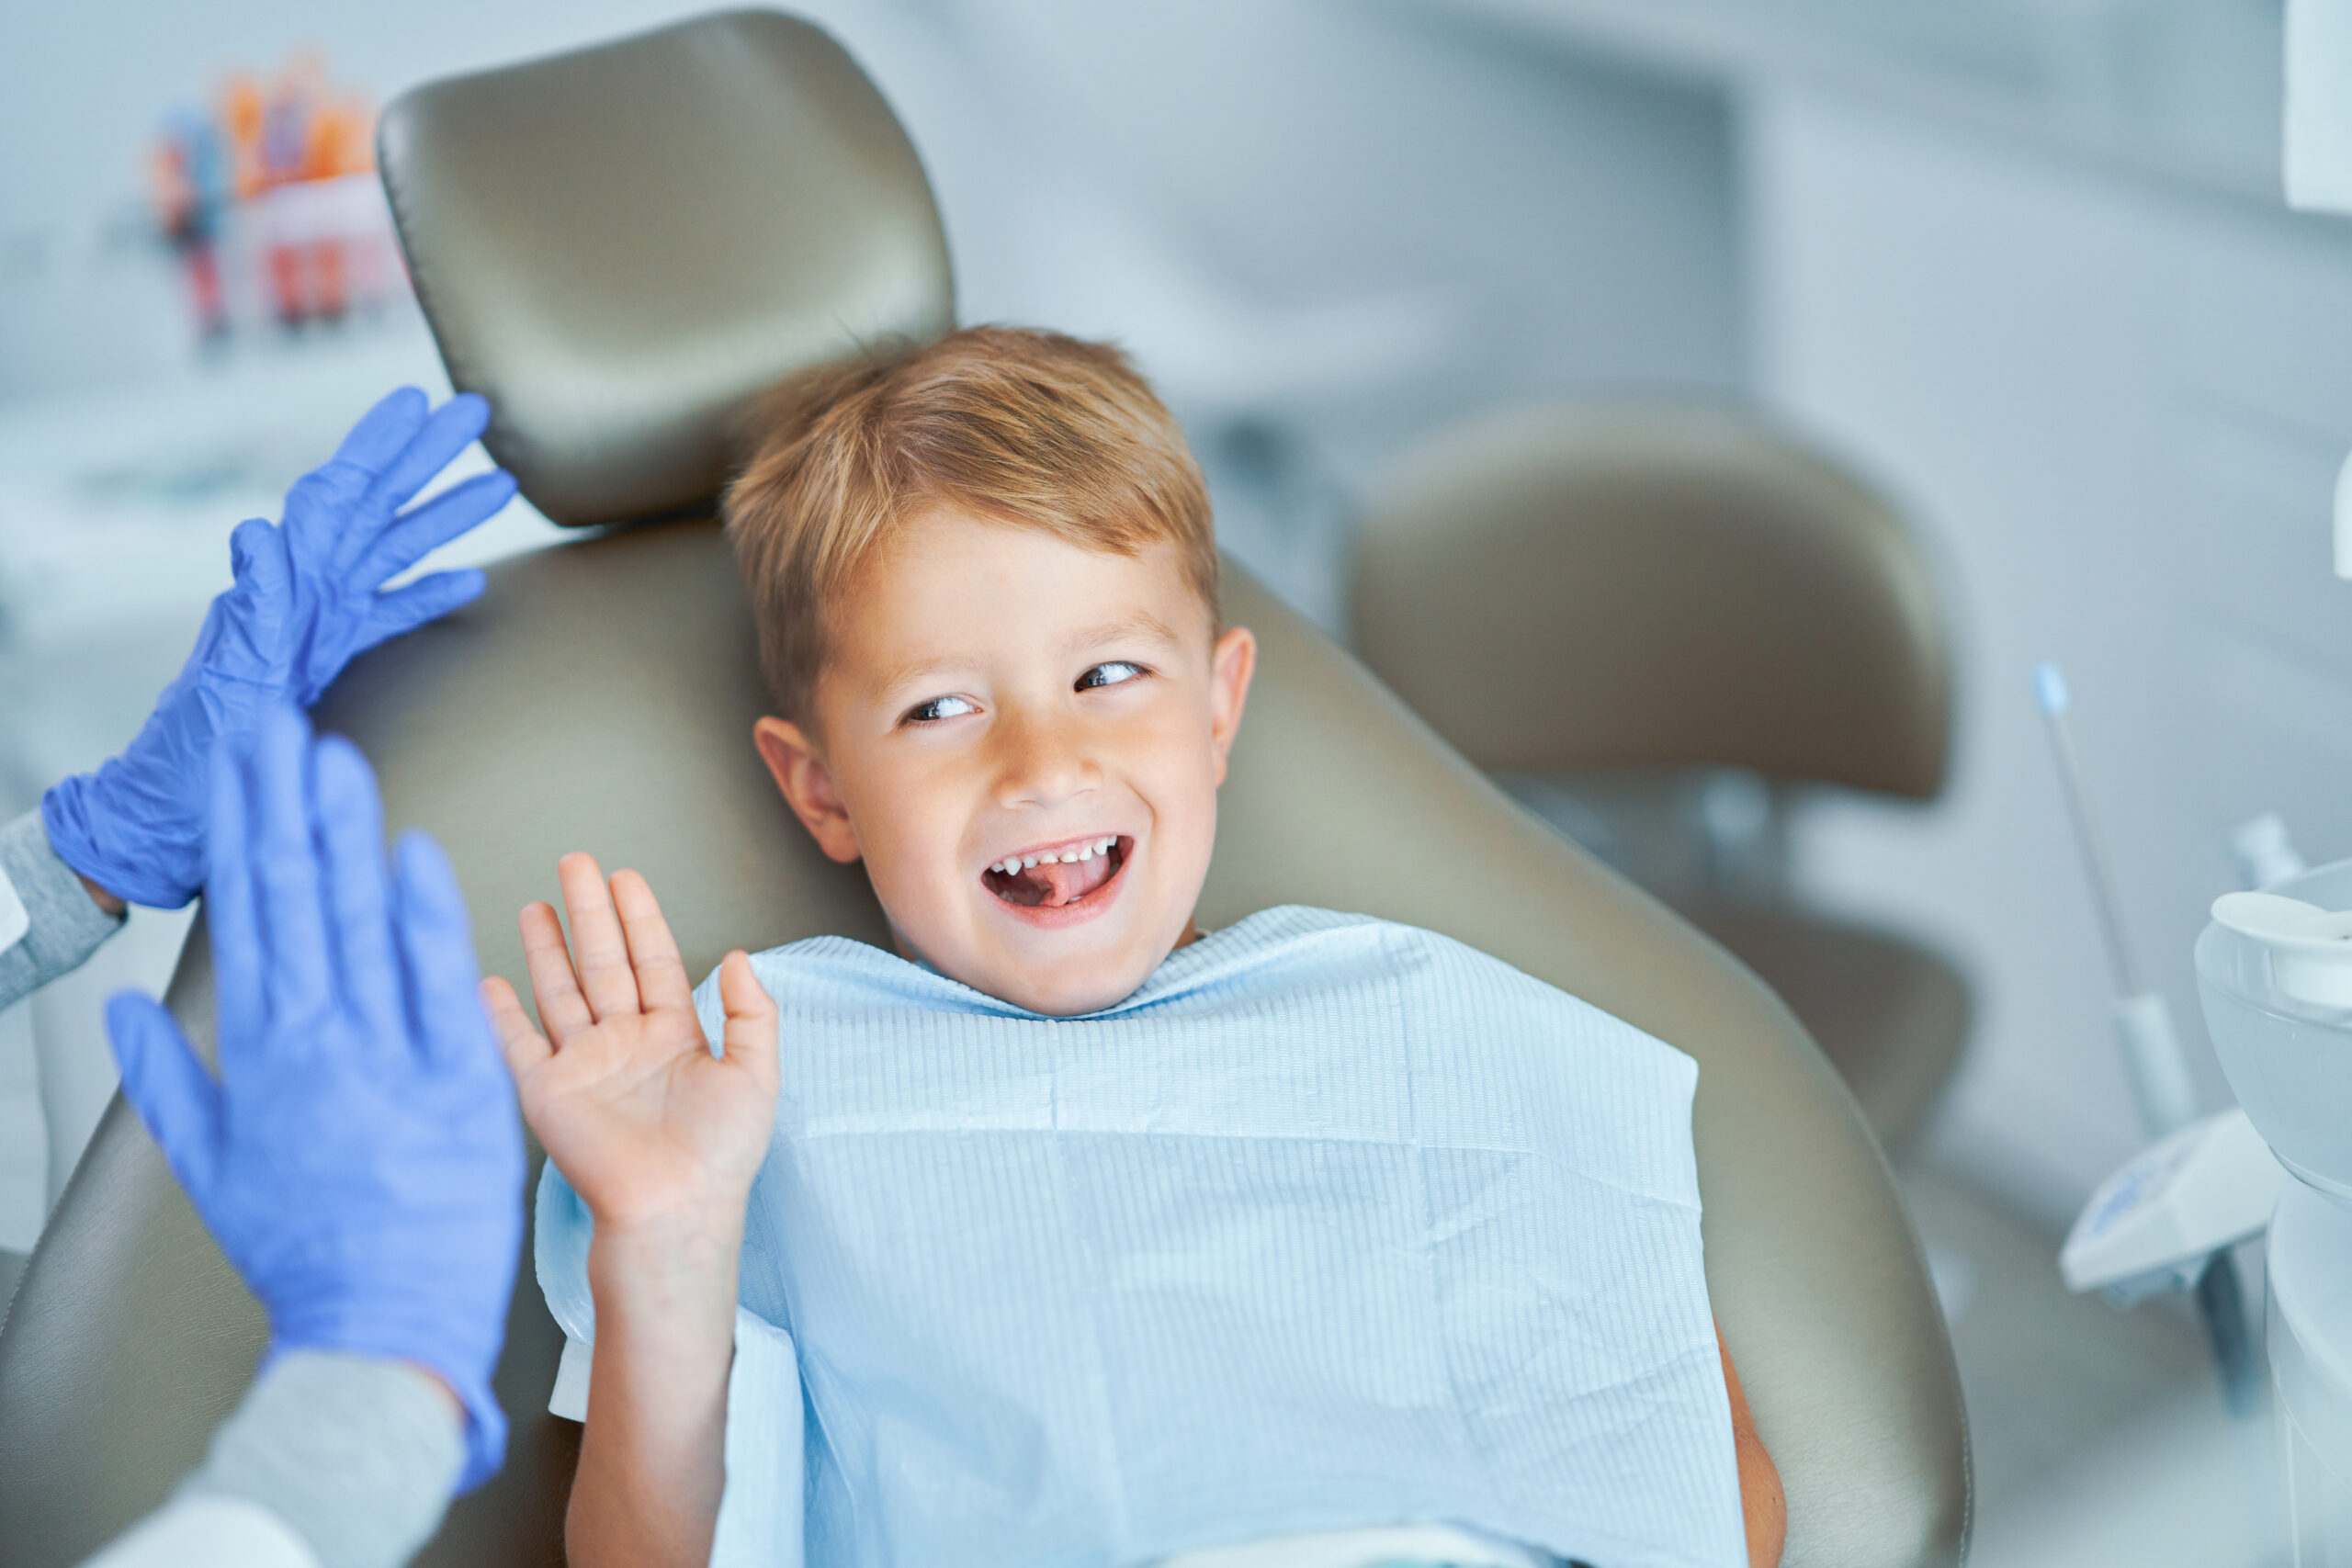 How to Prepare a Child with Autism for a Visit to the Dentist